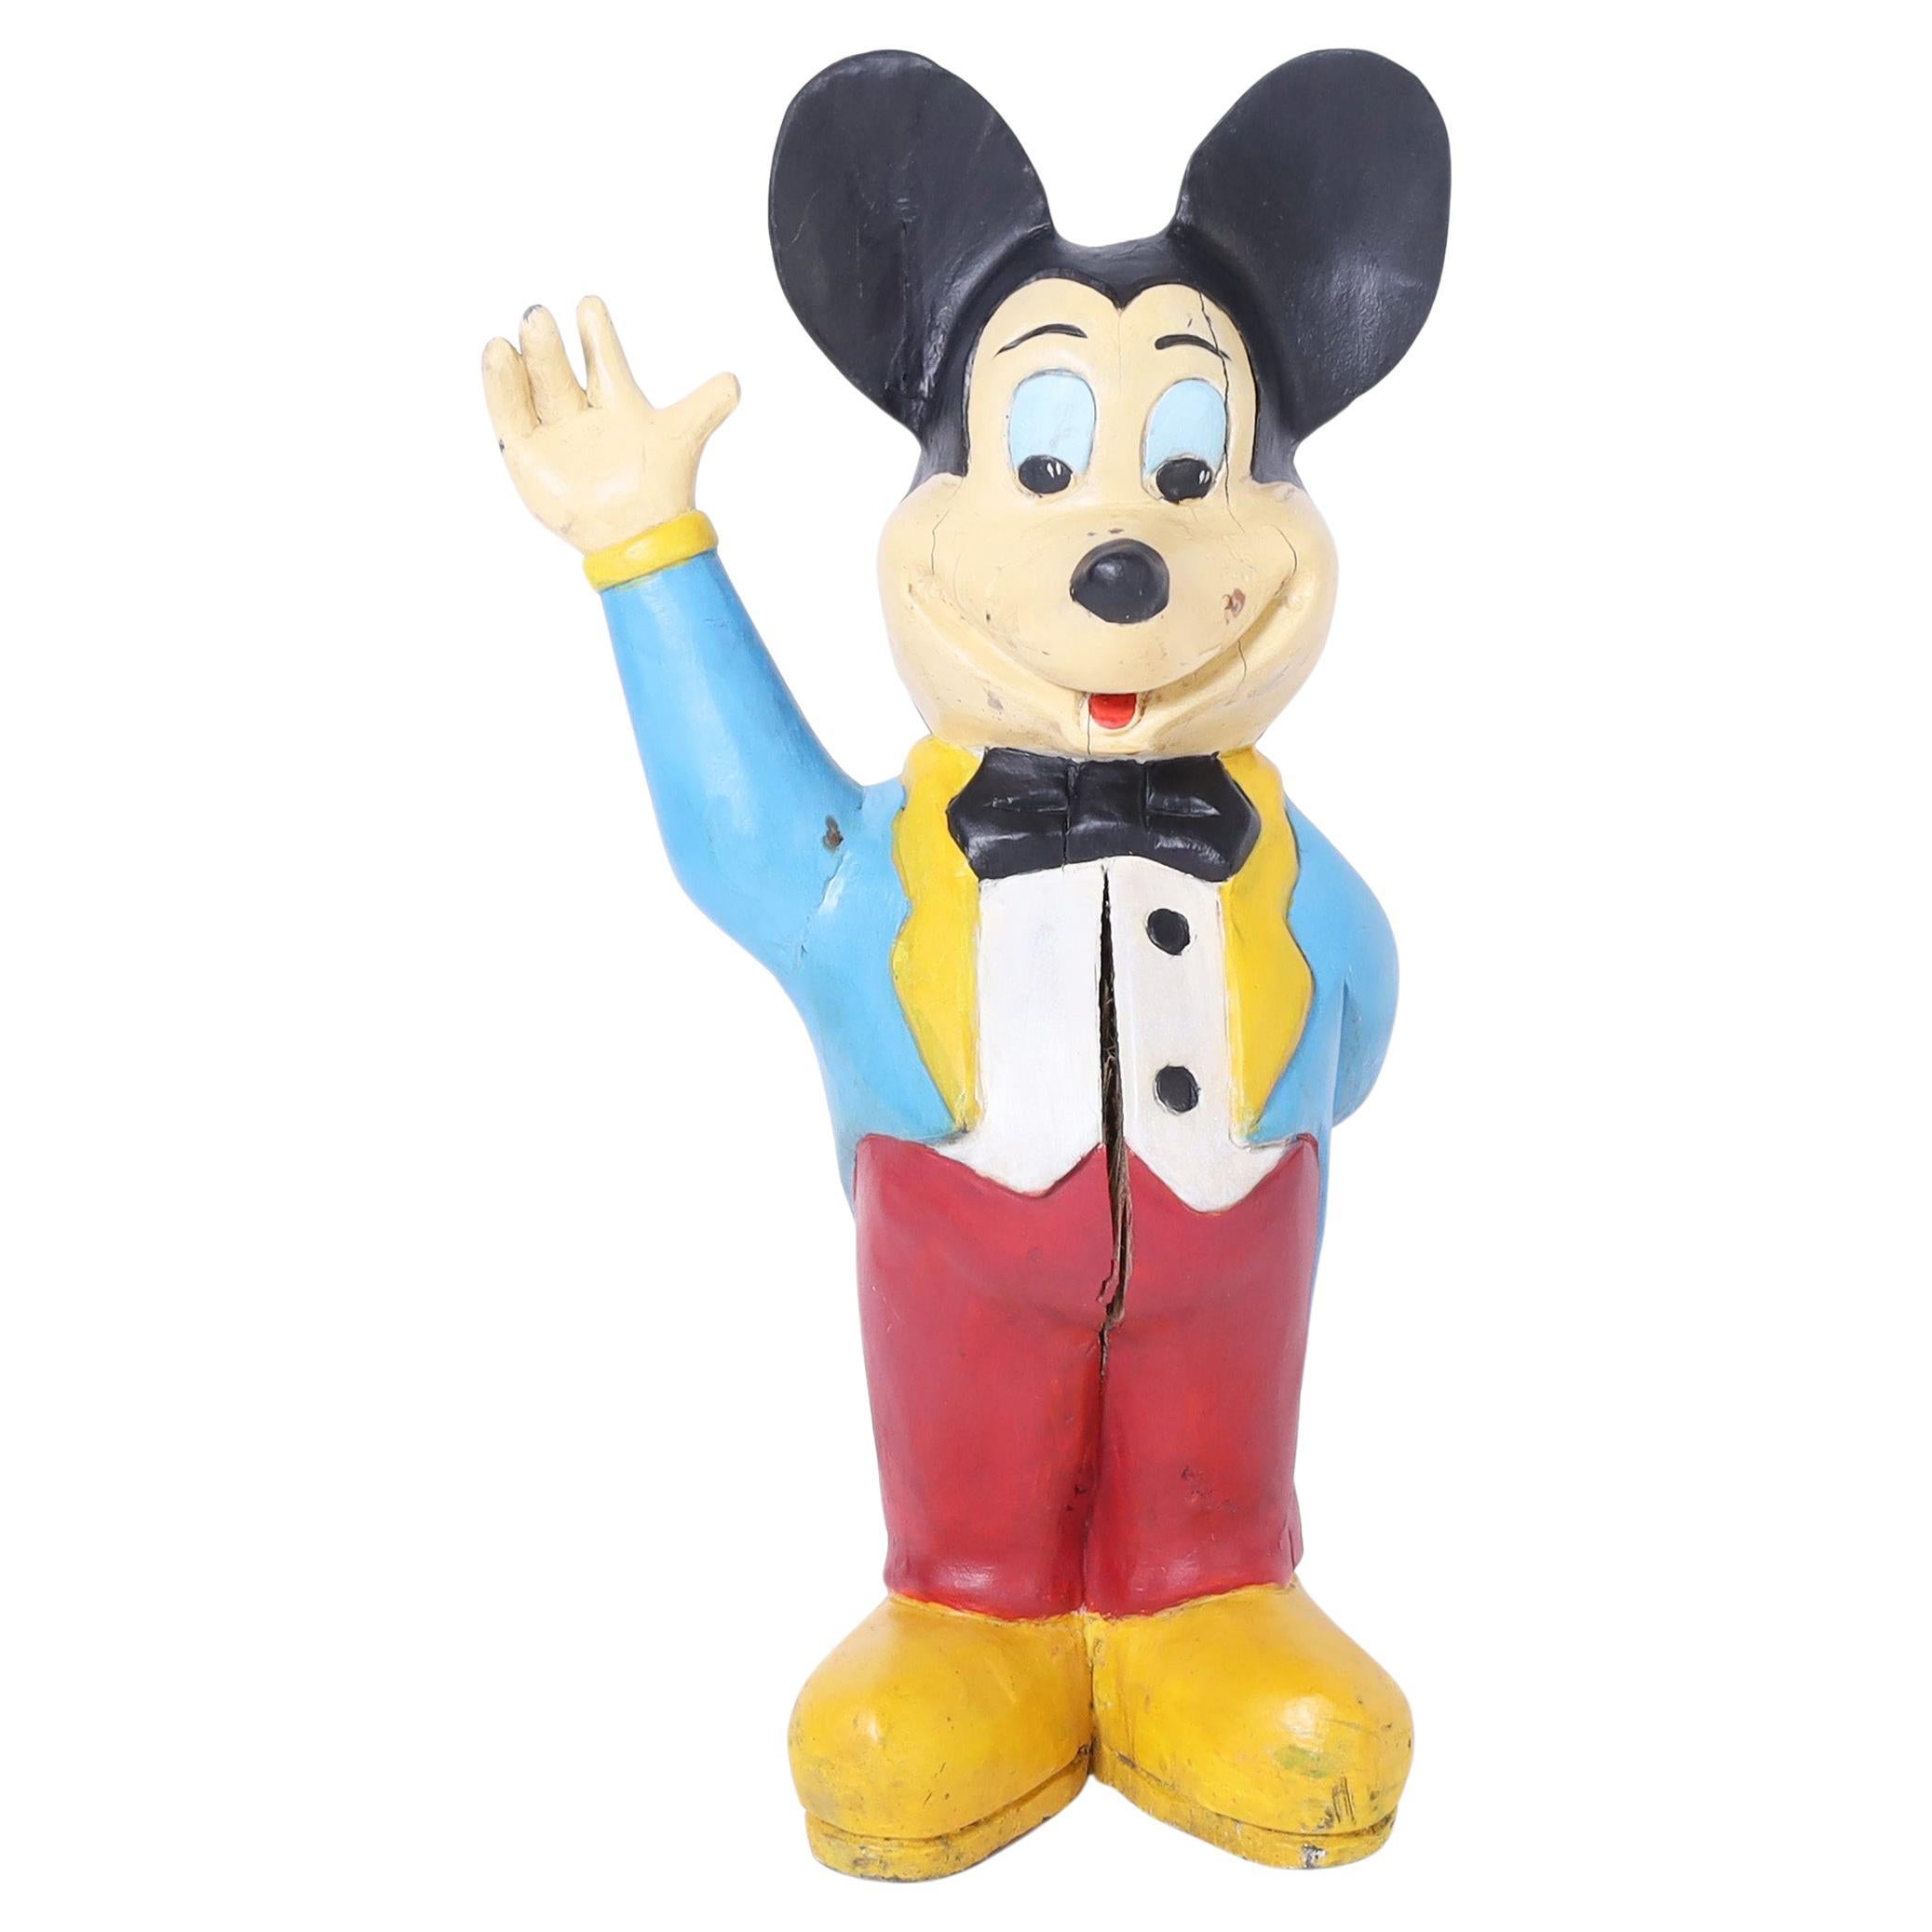 Sculpture vintage Mickey Mouse